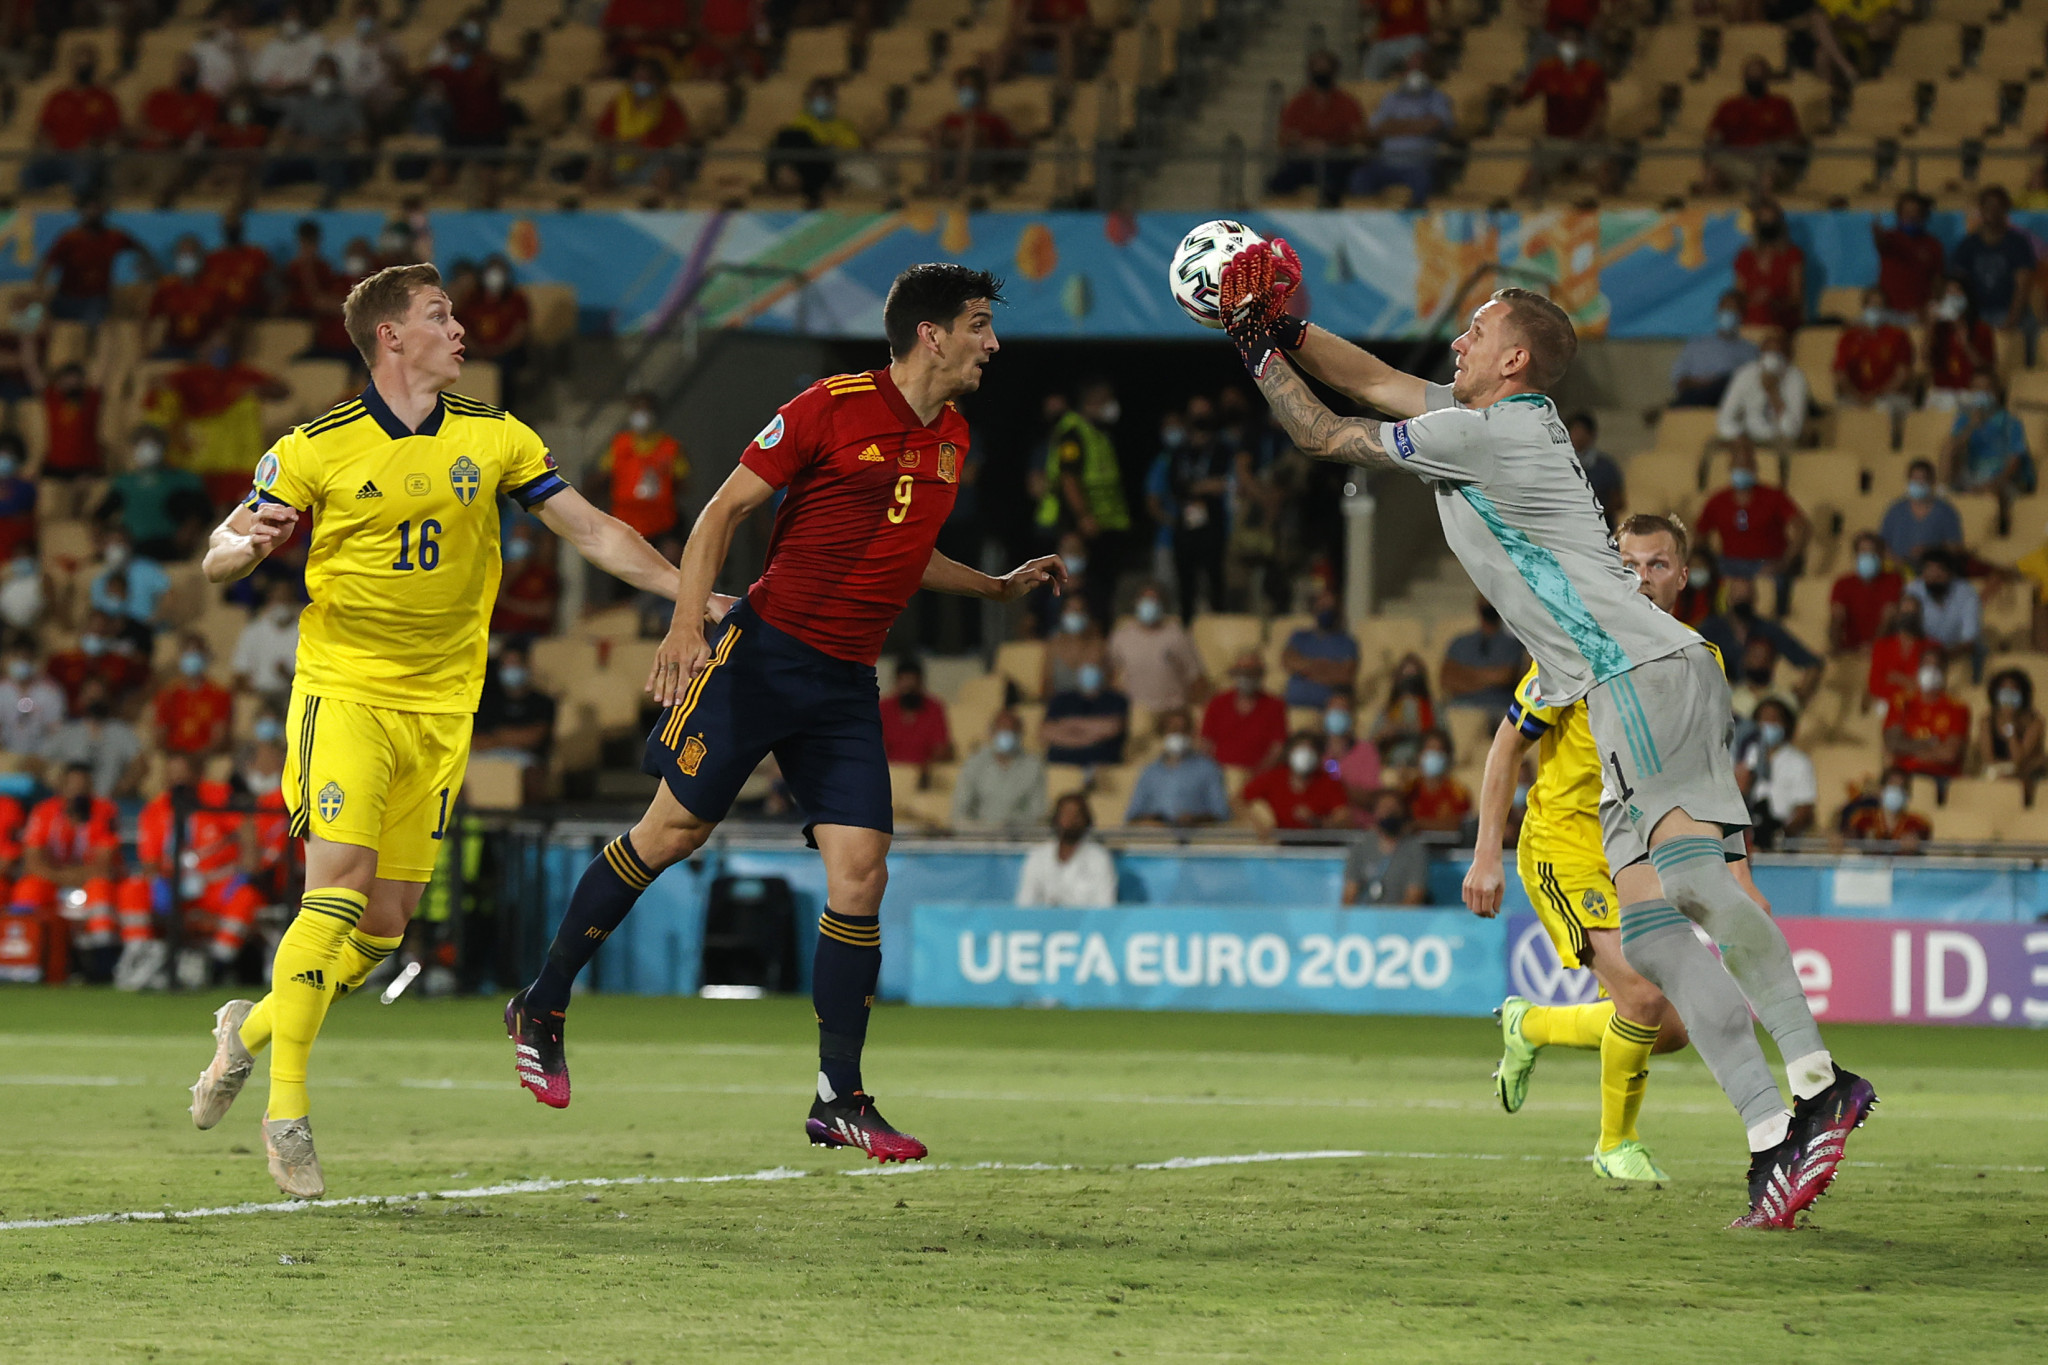 Spain and Sweden played out a 0-0 draw in Seville which leaves Slovakia top of Group E ©Getty Images